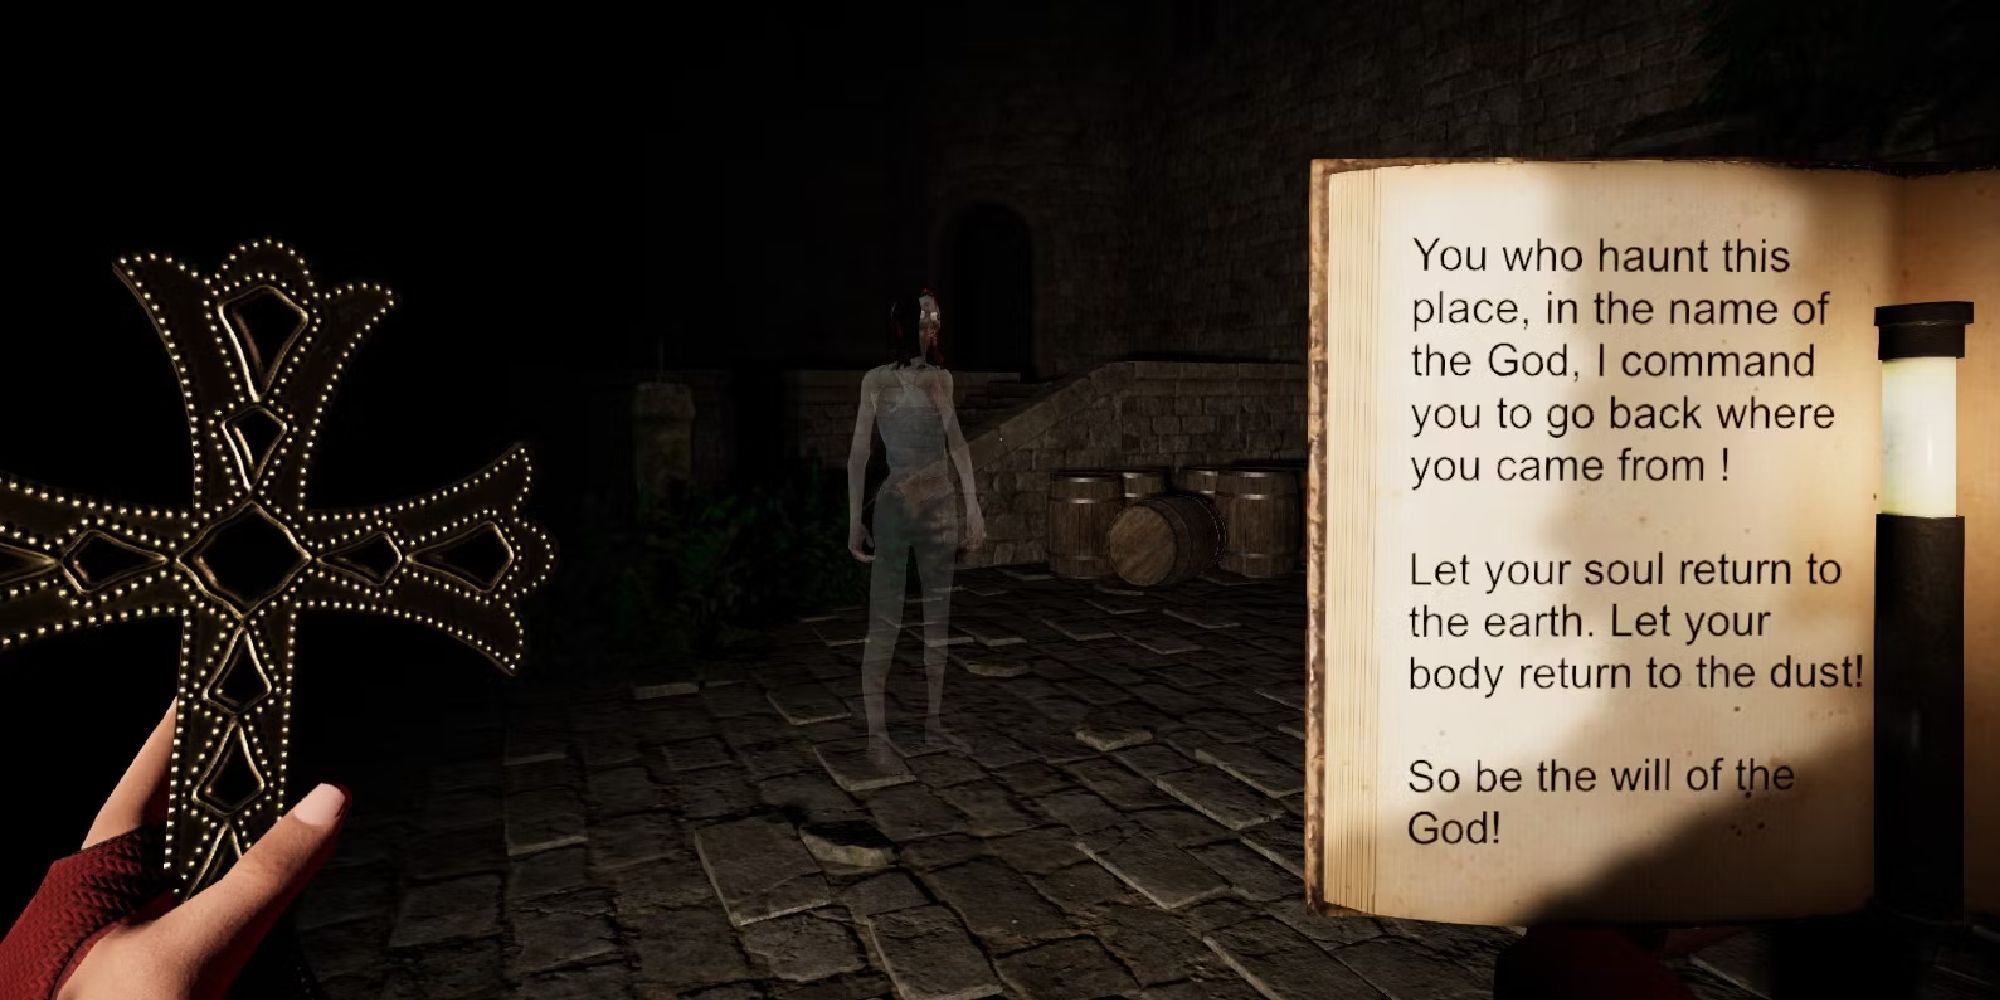 The player holds up a cross and a book as they confront a spirit. 